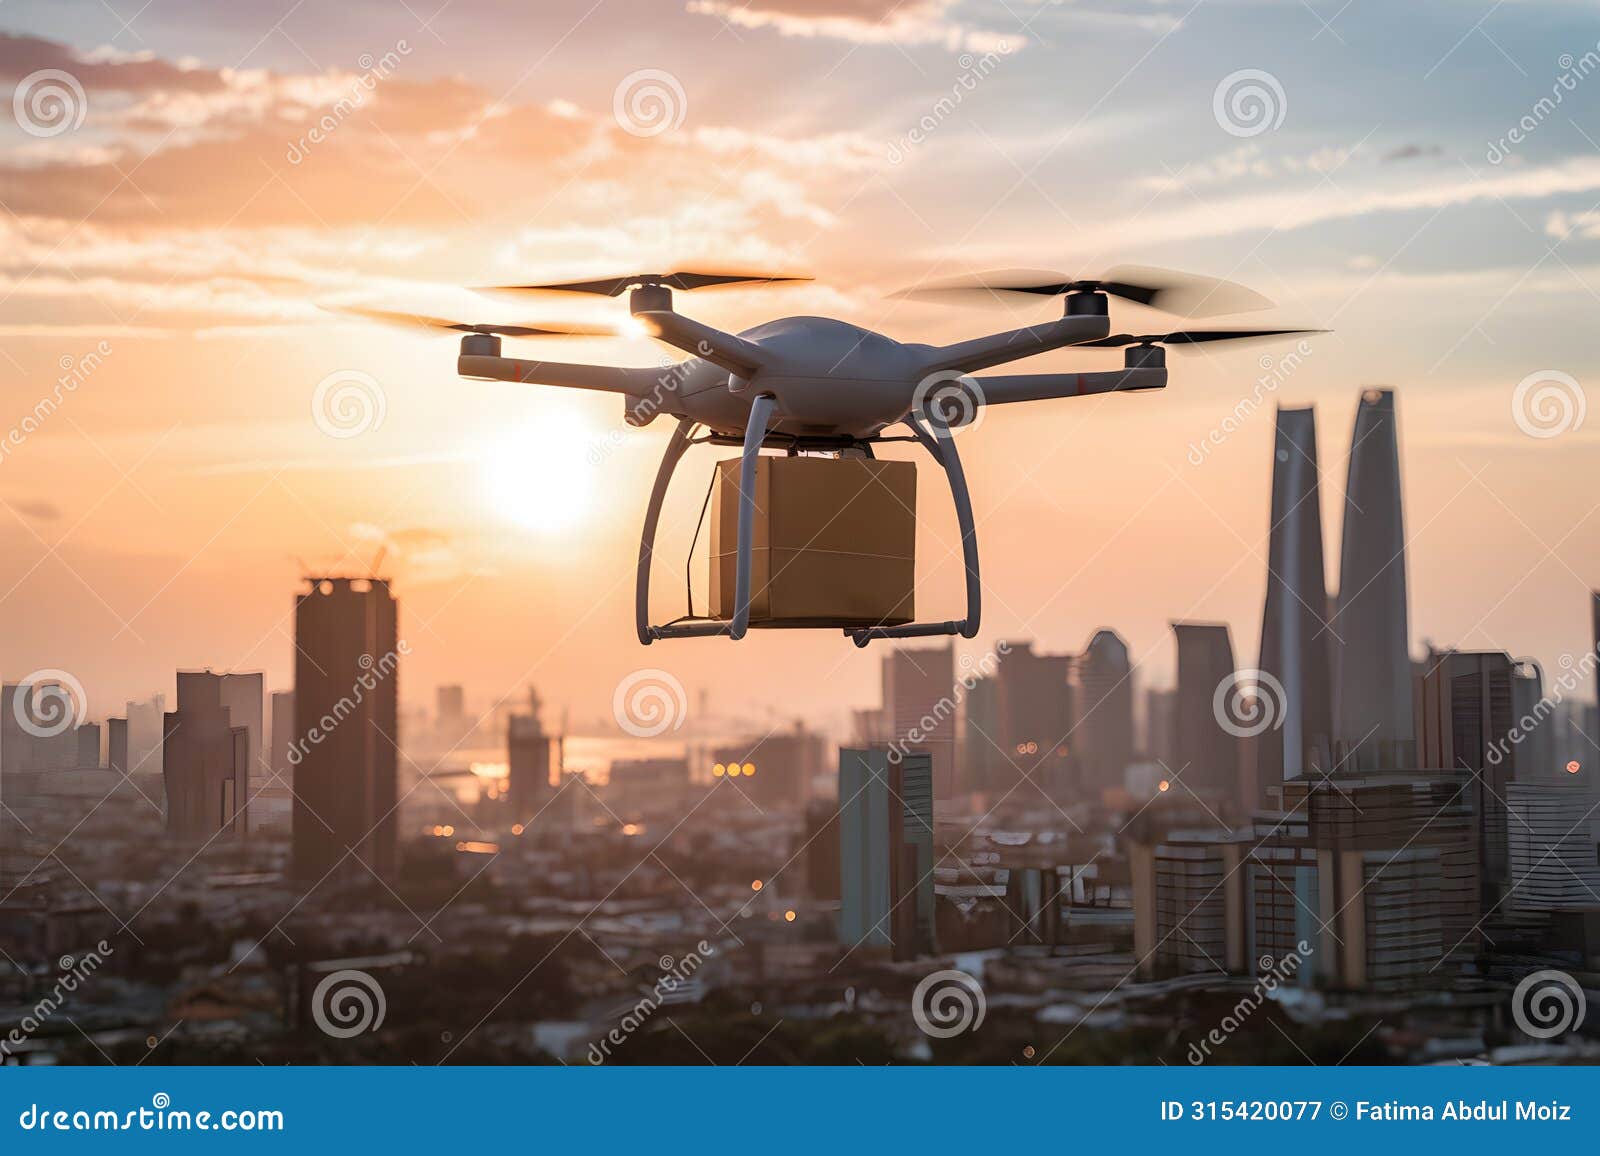 efficient and fast drone package delivery showcased in the city